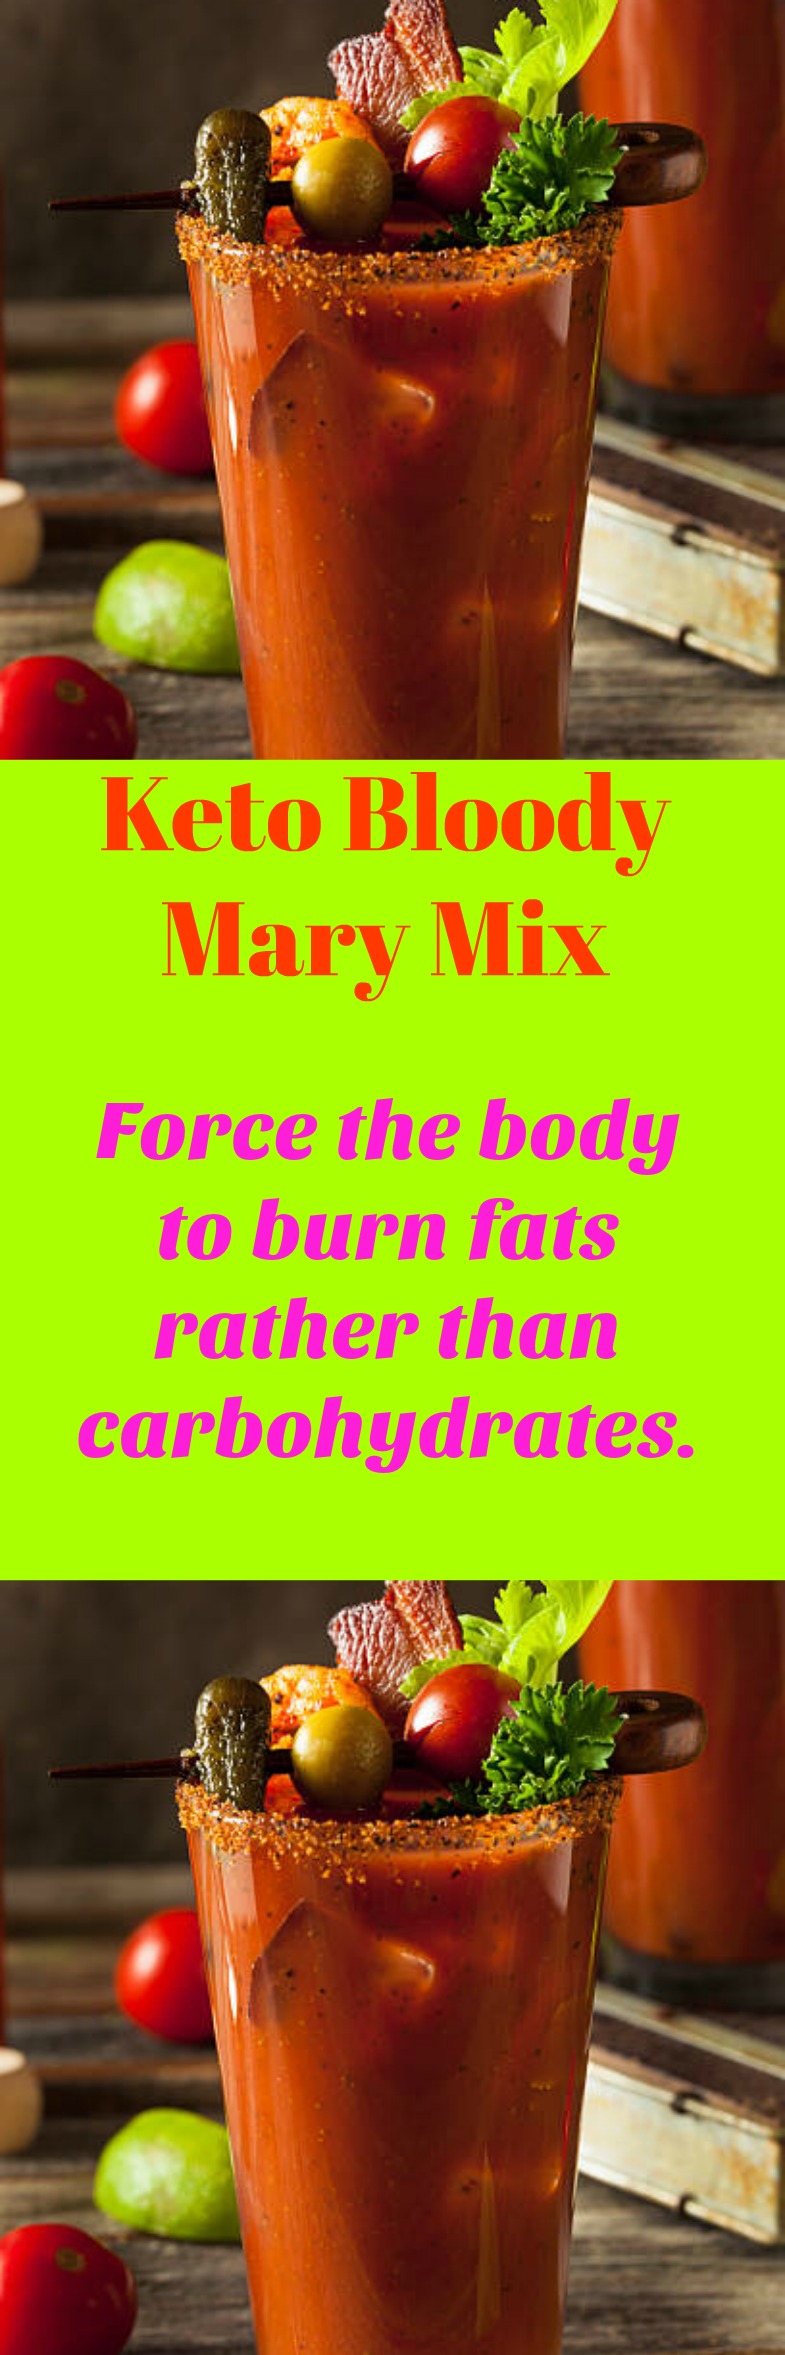 Keto Bloody Mary Mix. The Ketogenic diet is an easy low carb healthy weight loss program.This is a DIY recipe for a Low Carb spicy drink. Alcohol or alcohol free.